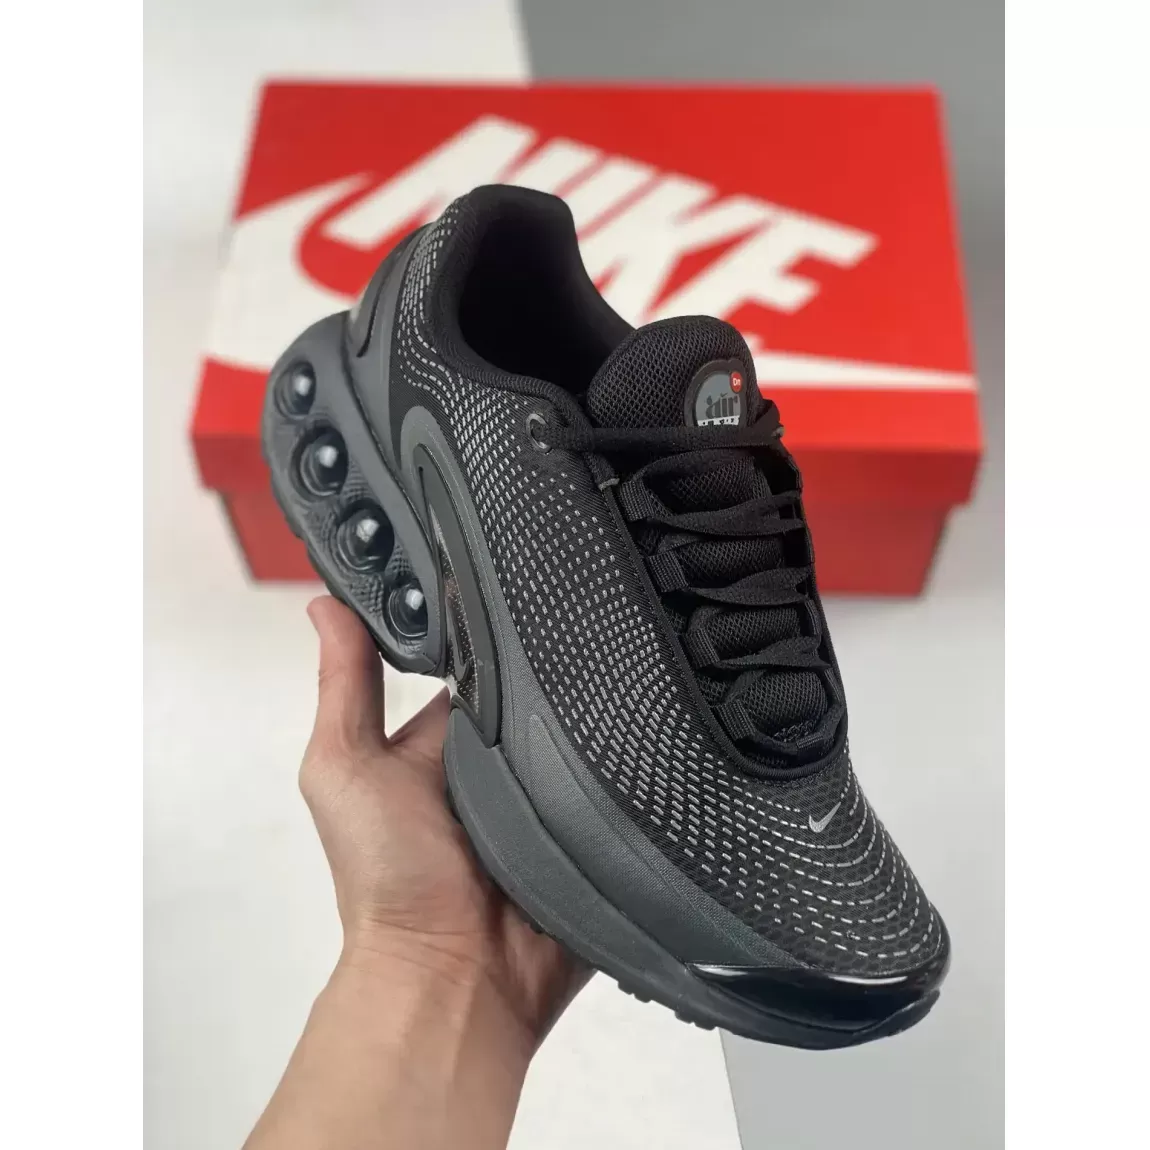 How To Buy Nike Air Max Dn Anthracite Dark Smoke Grey